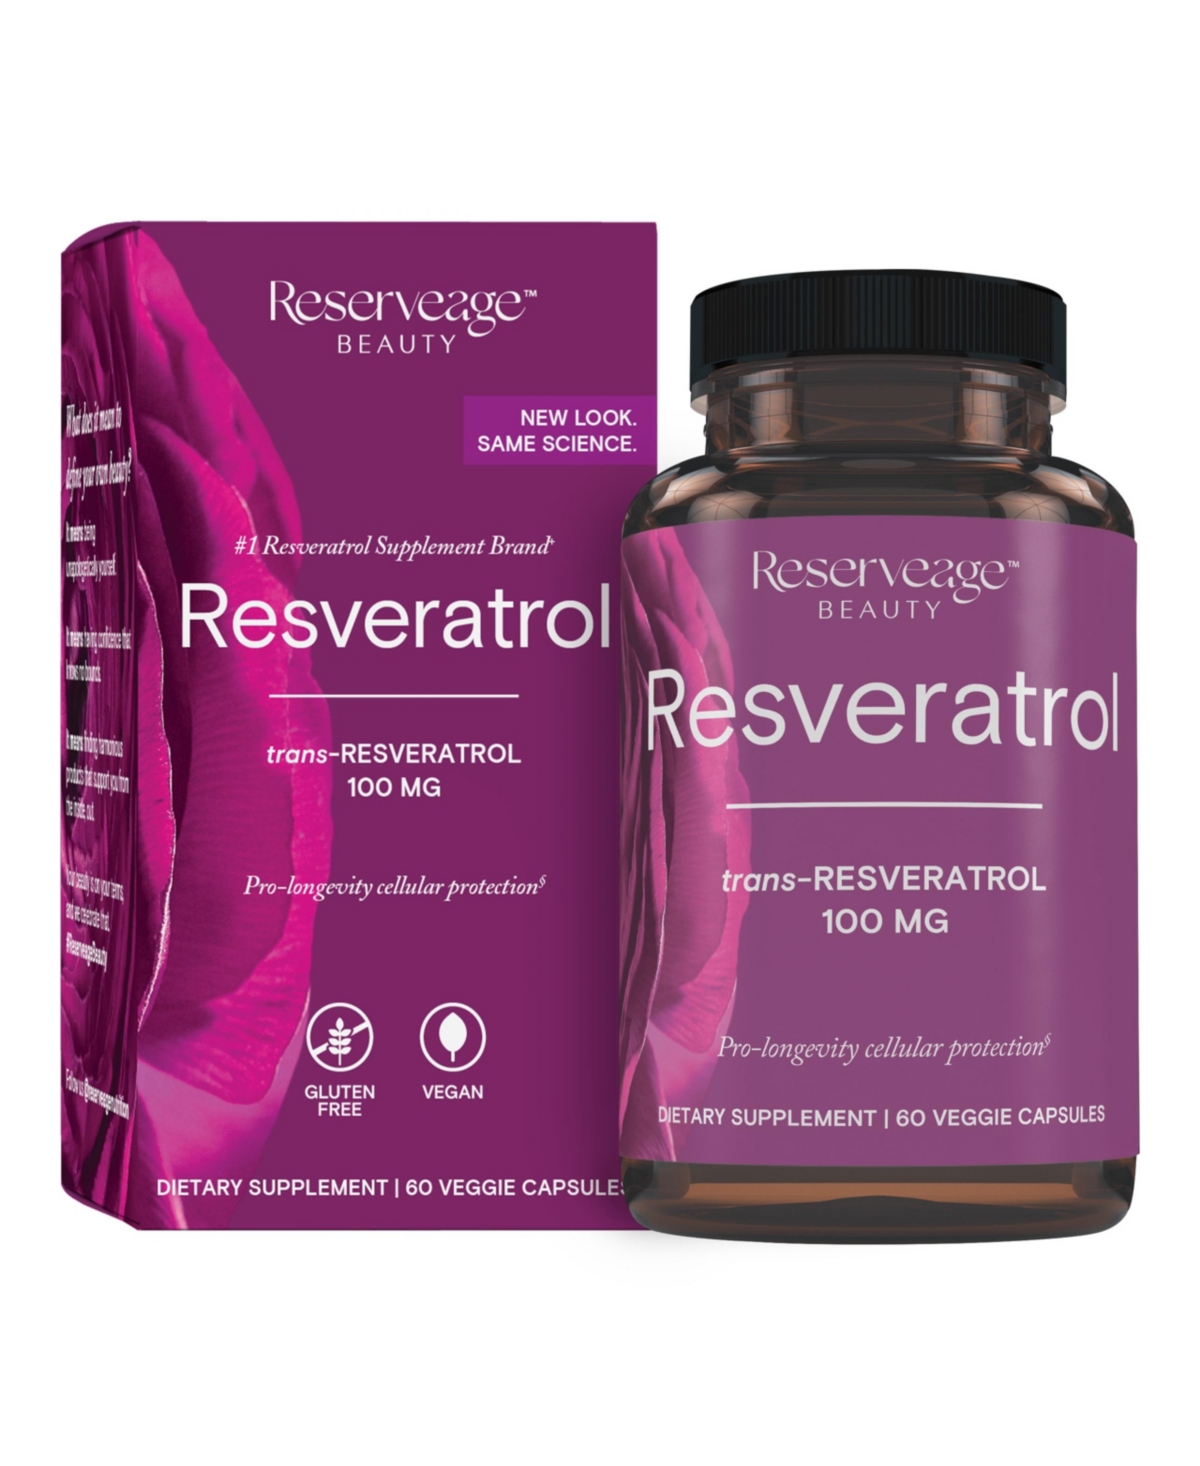 Resveratrol 100 mg Antioxidant Supplement for Heart and Cellular Health, Supports Healthy Aging, Paleo, Keto, 60 Capsules (60 Servings)